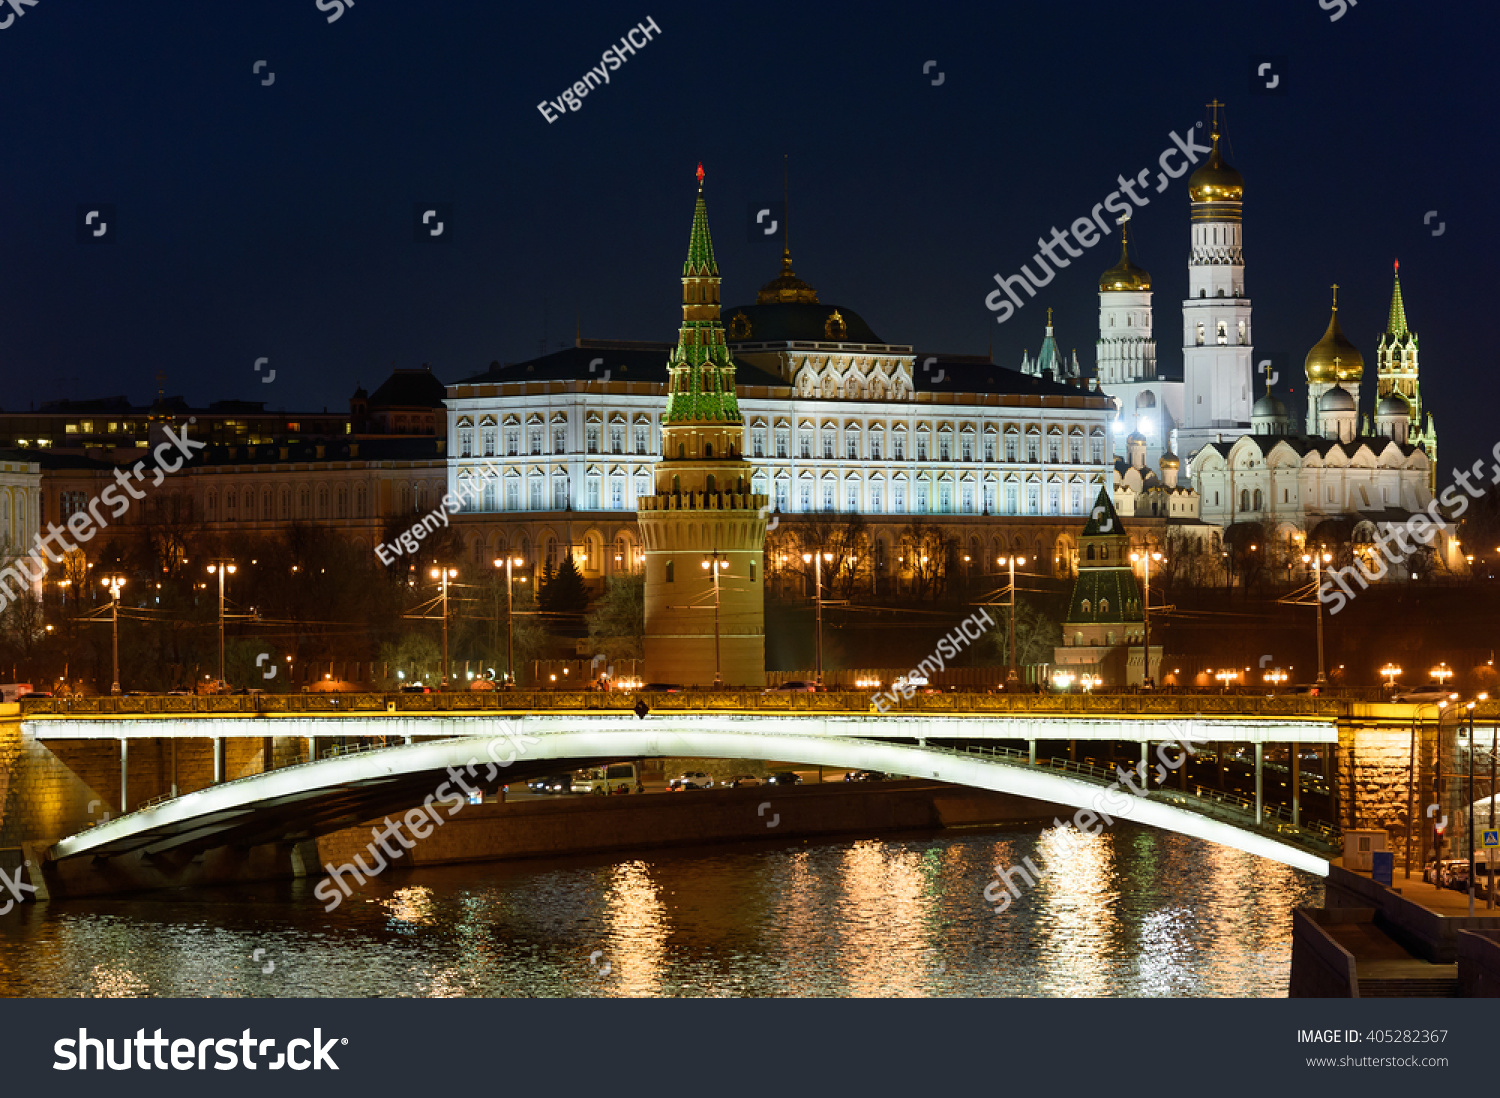 Beautiful view of architecture Moscow redbrick Kremlin landmarks at night with bridge on river Moscow with reflected lights from street and other buildings and  sky as a background. Capital of Russia. #405282367